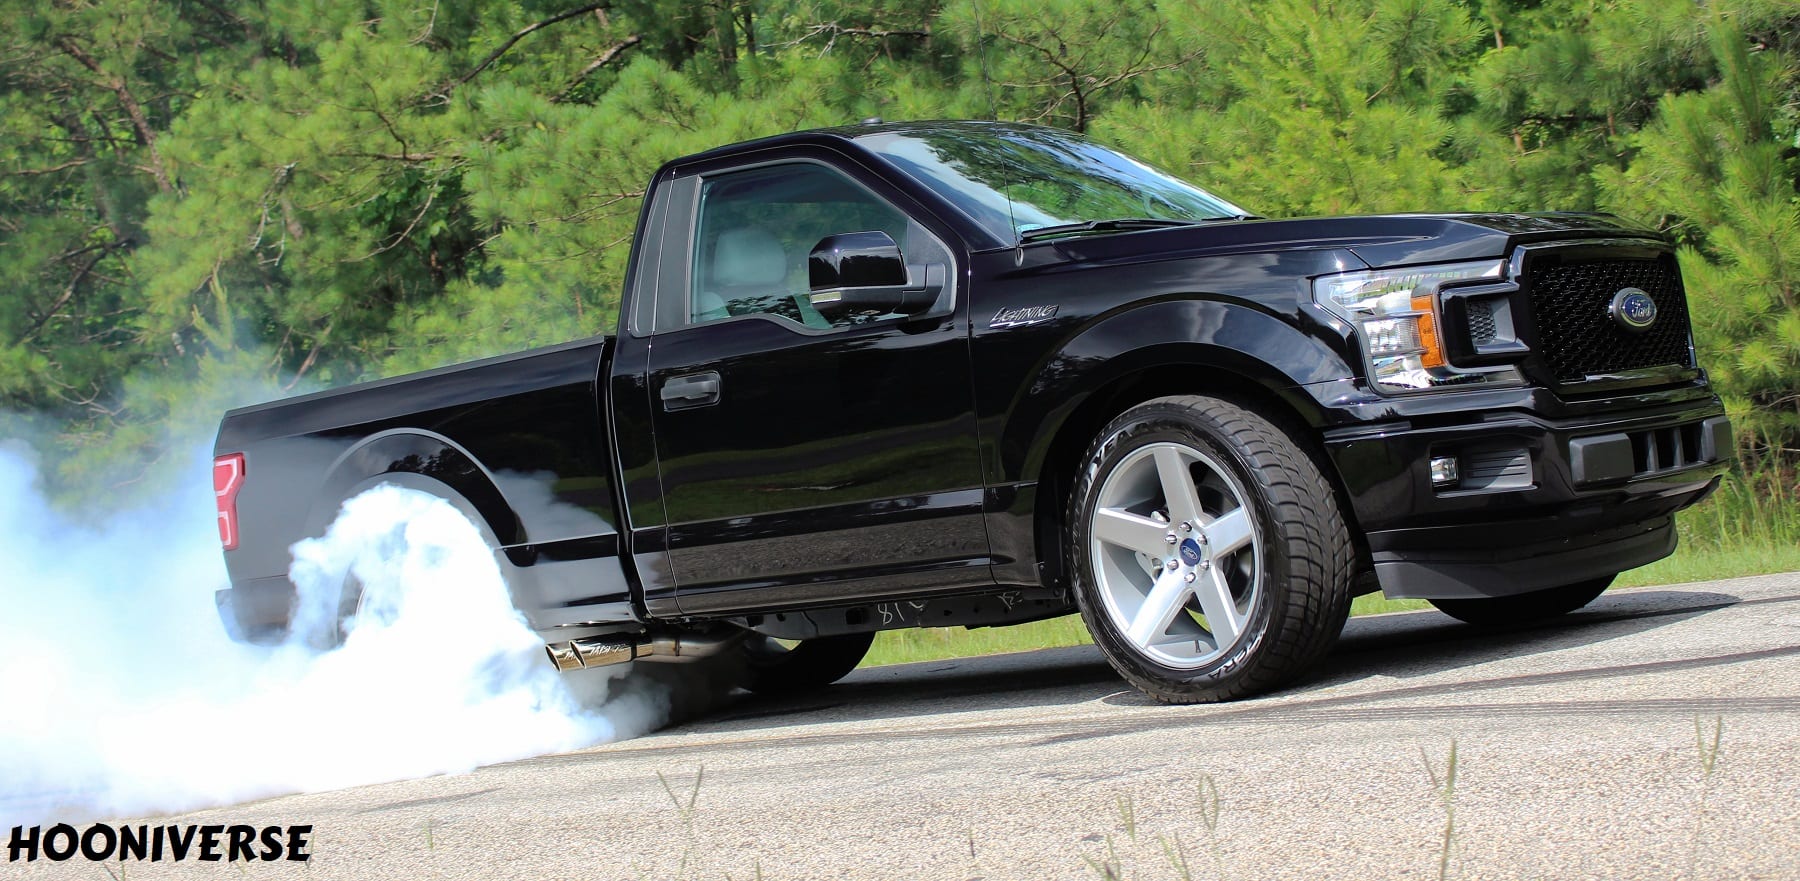 F-150 Lightning : 2022 Ford F-150 Lightning Versus Cybertruck, Hummer EV ... / The ford special vehicle team (svt) was conceived in 1991, when ford senior management recognized the corporate advantages of.